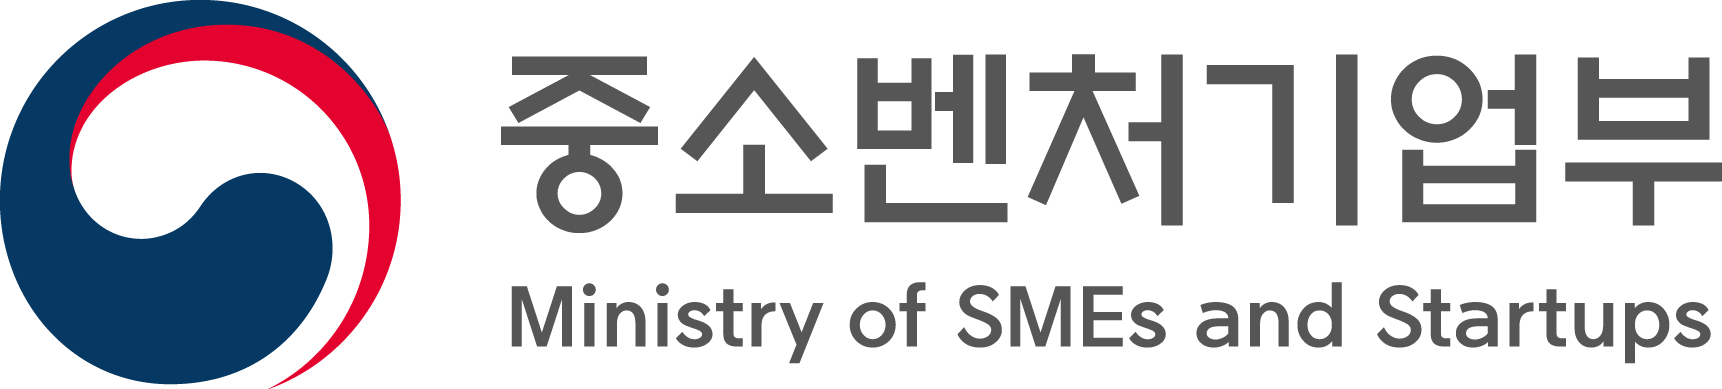 Ministry of SMEs and StartUps